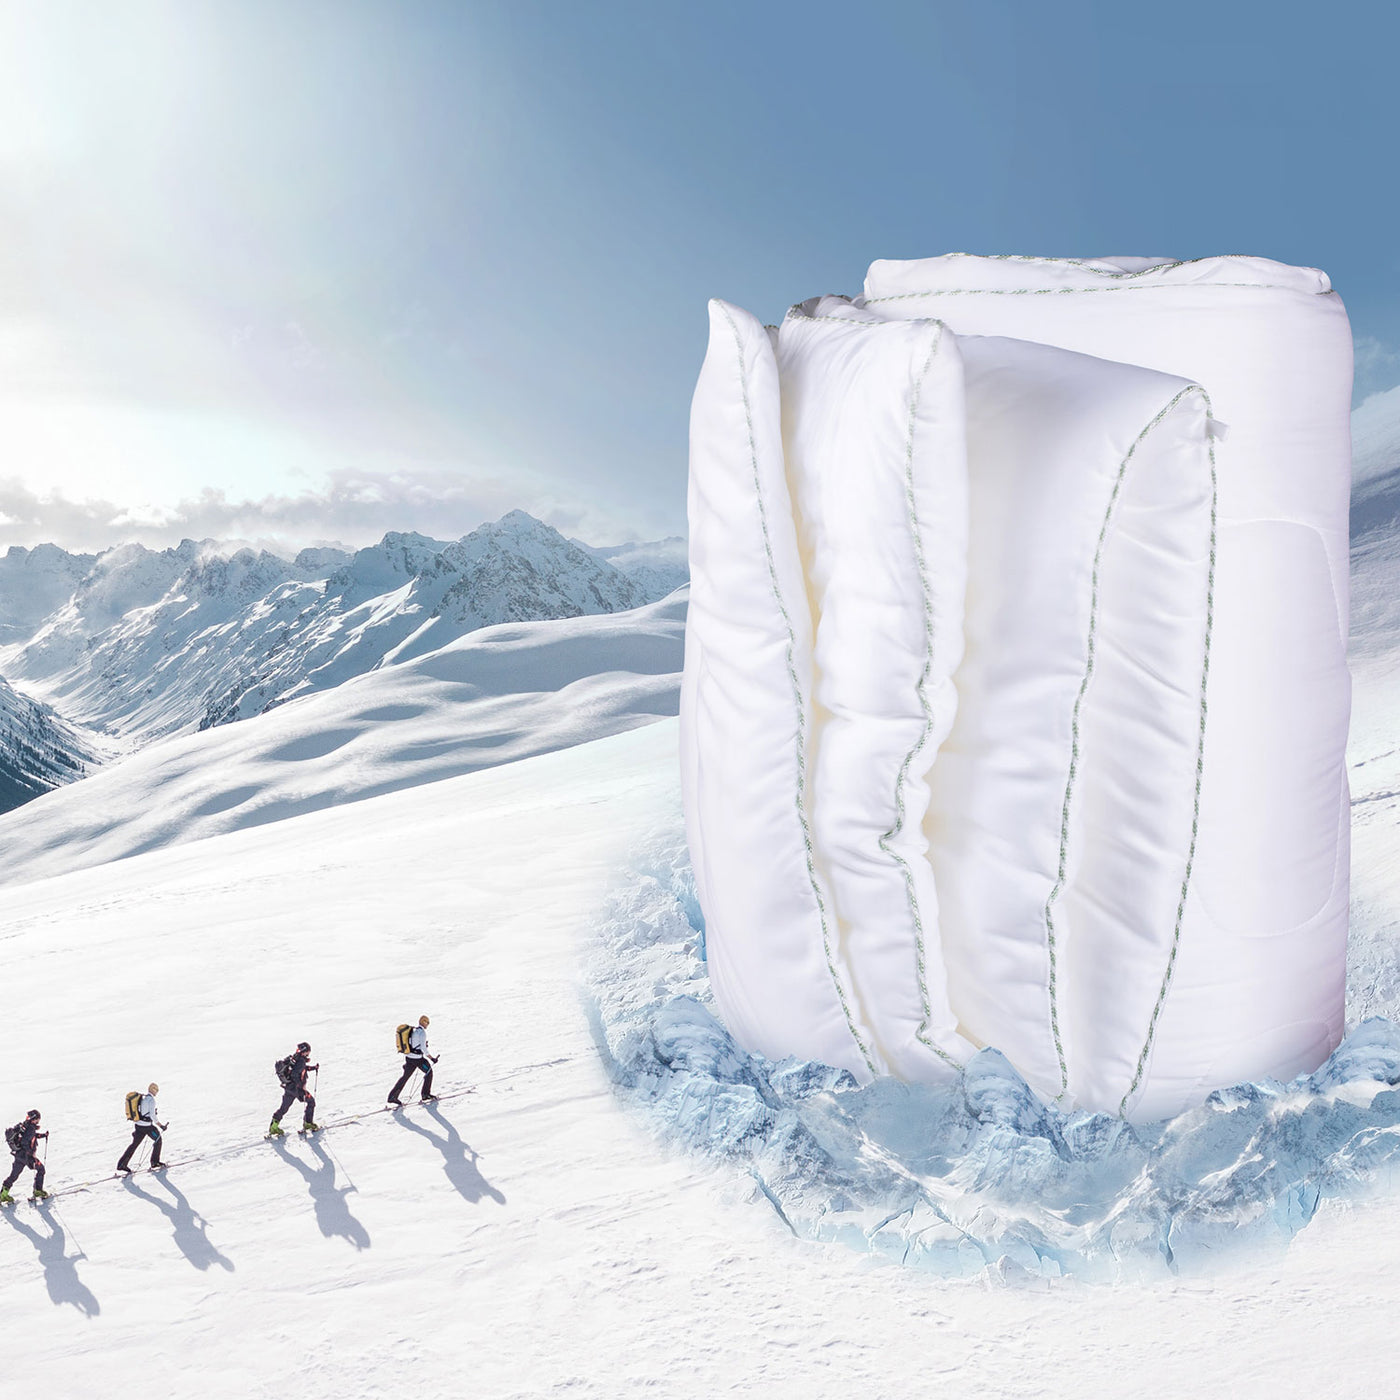 Lightweight Extreme Winter Quilt made from extracts of Natural Wood - TENCEL™ ( Certified by a Swiss laboratory)